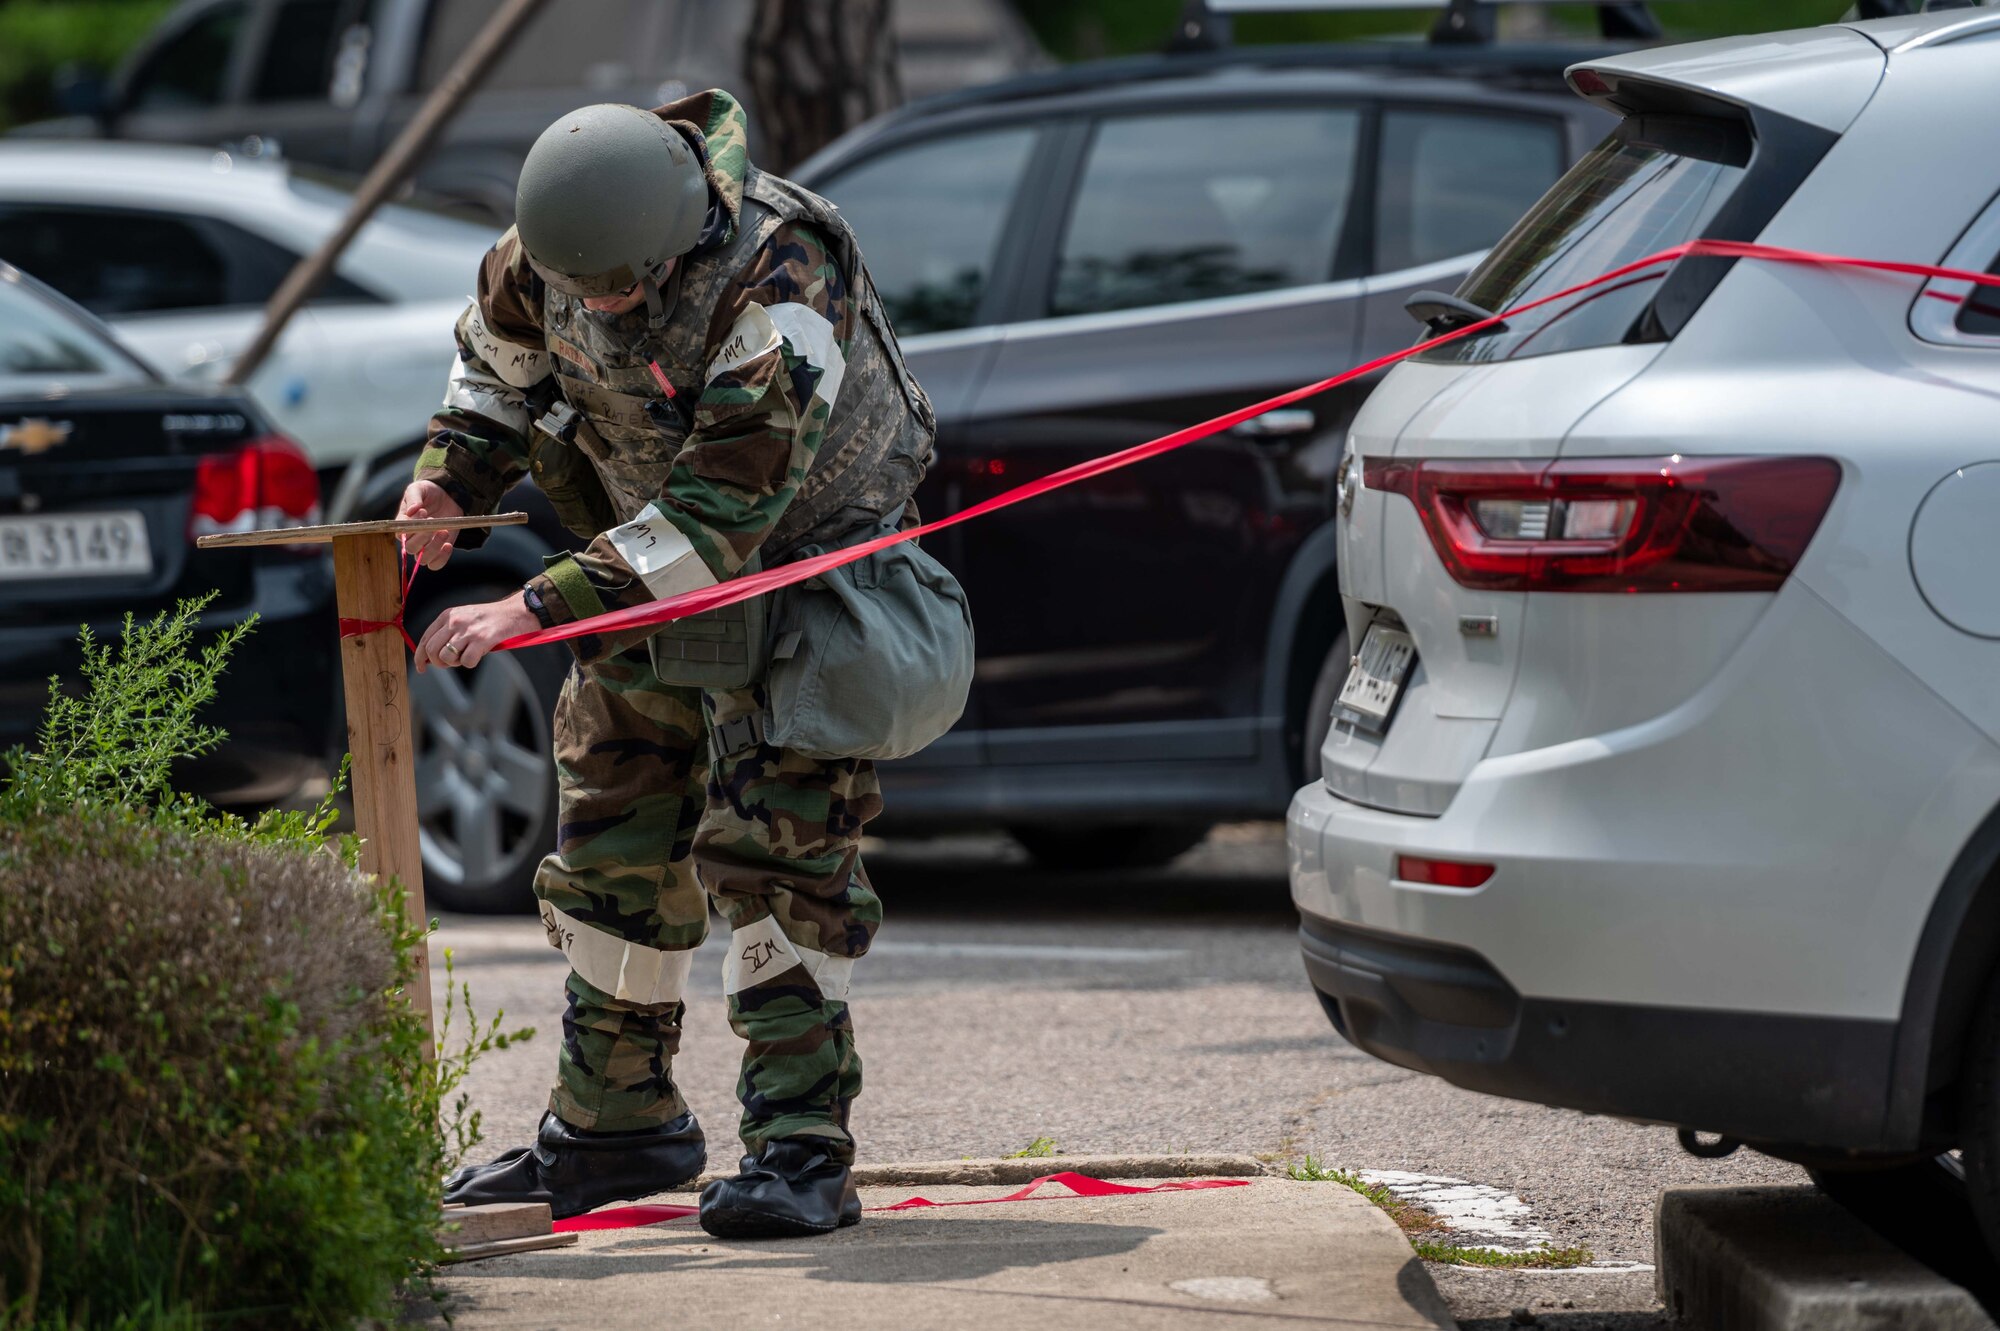 Tech. Sgt. KC Ratekin, 51st Comptroller Squadron financial analysis supervisor, sets up a perimeter around a simulated unexploded ordnance (UXO) during a base-wide training event at Osan Air Base